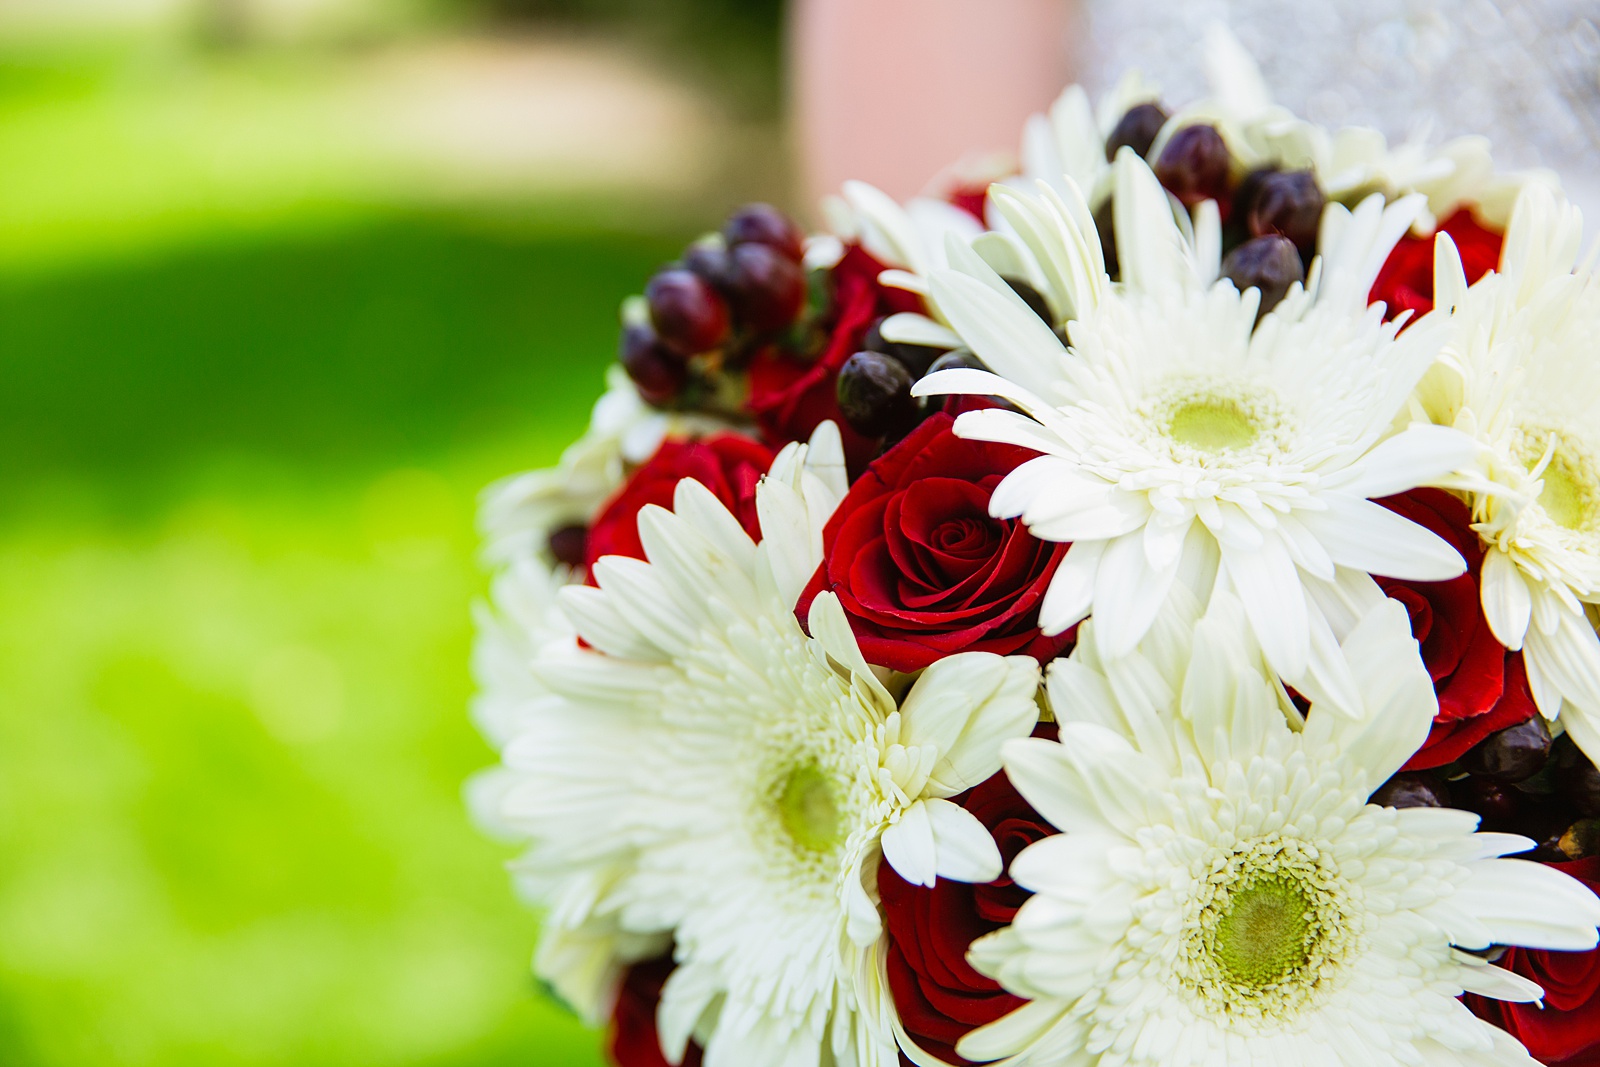 Bride's white daisy and red rose bouquet by PMA Photography.